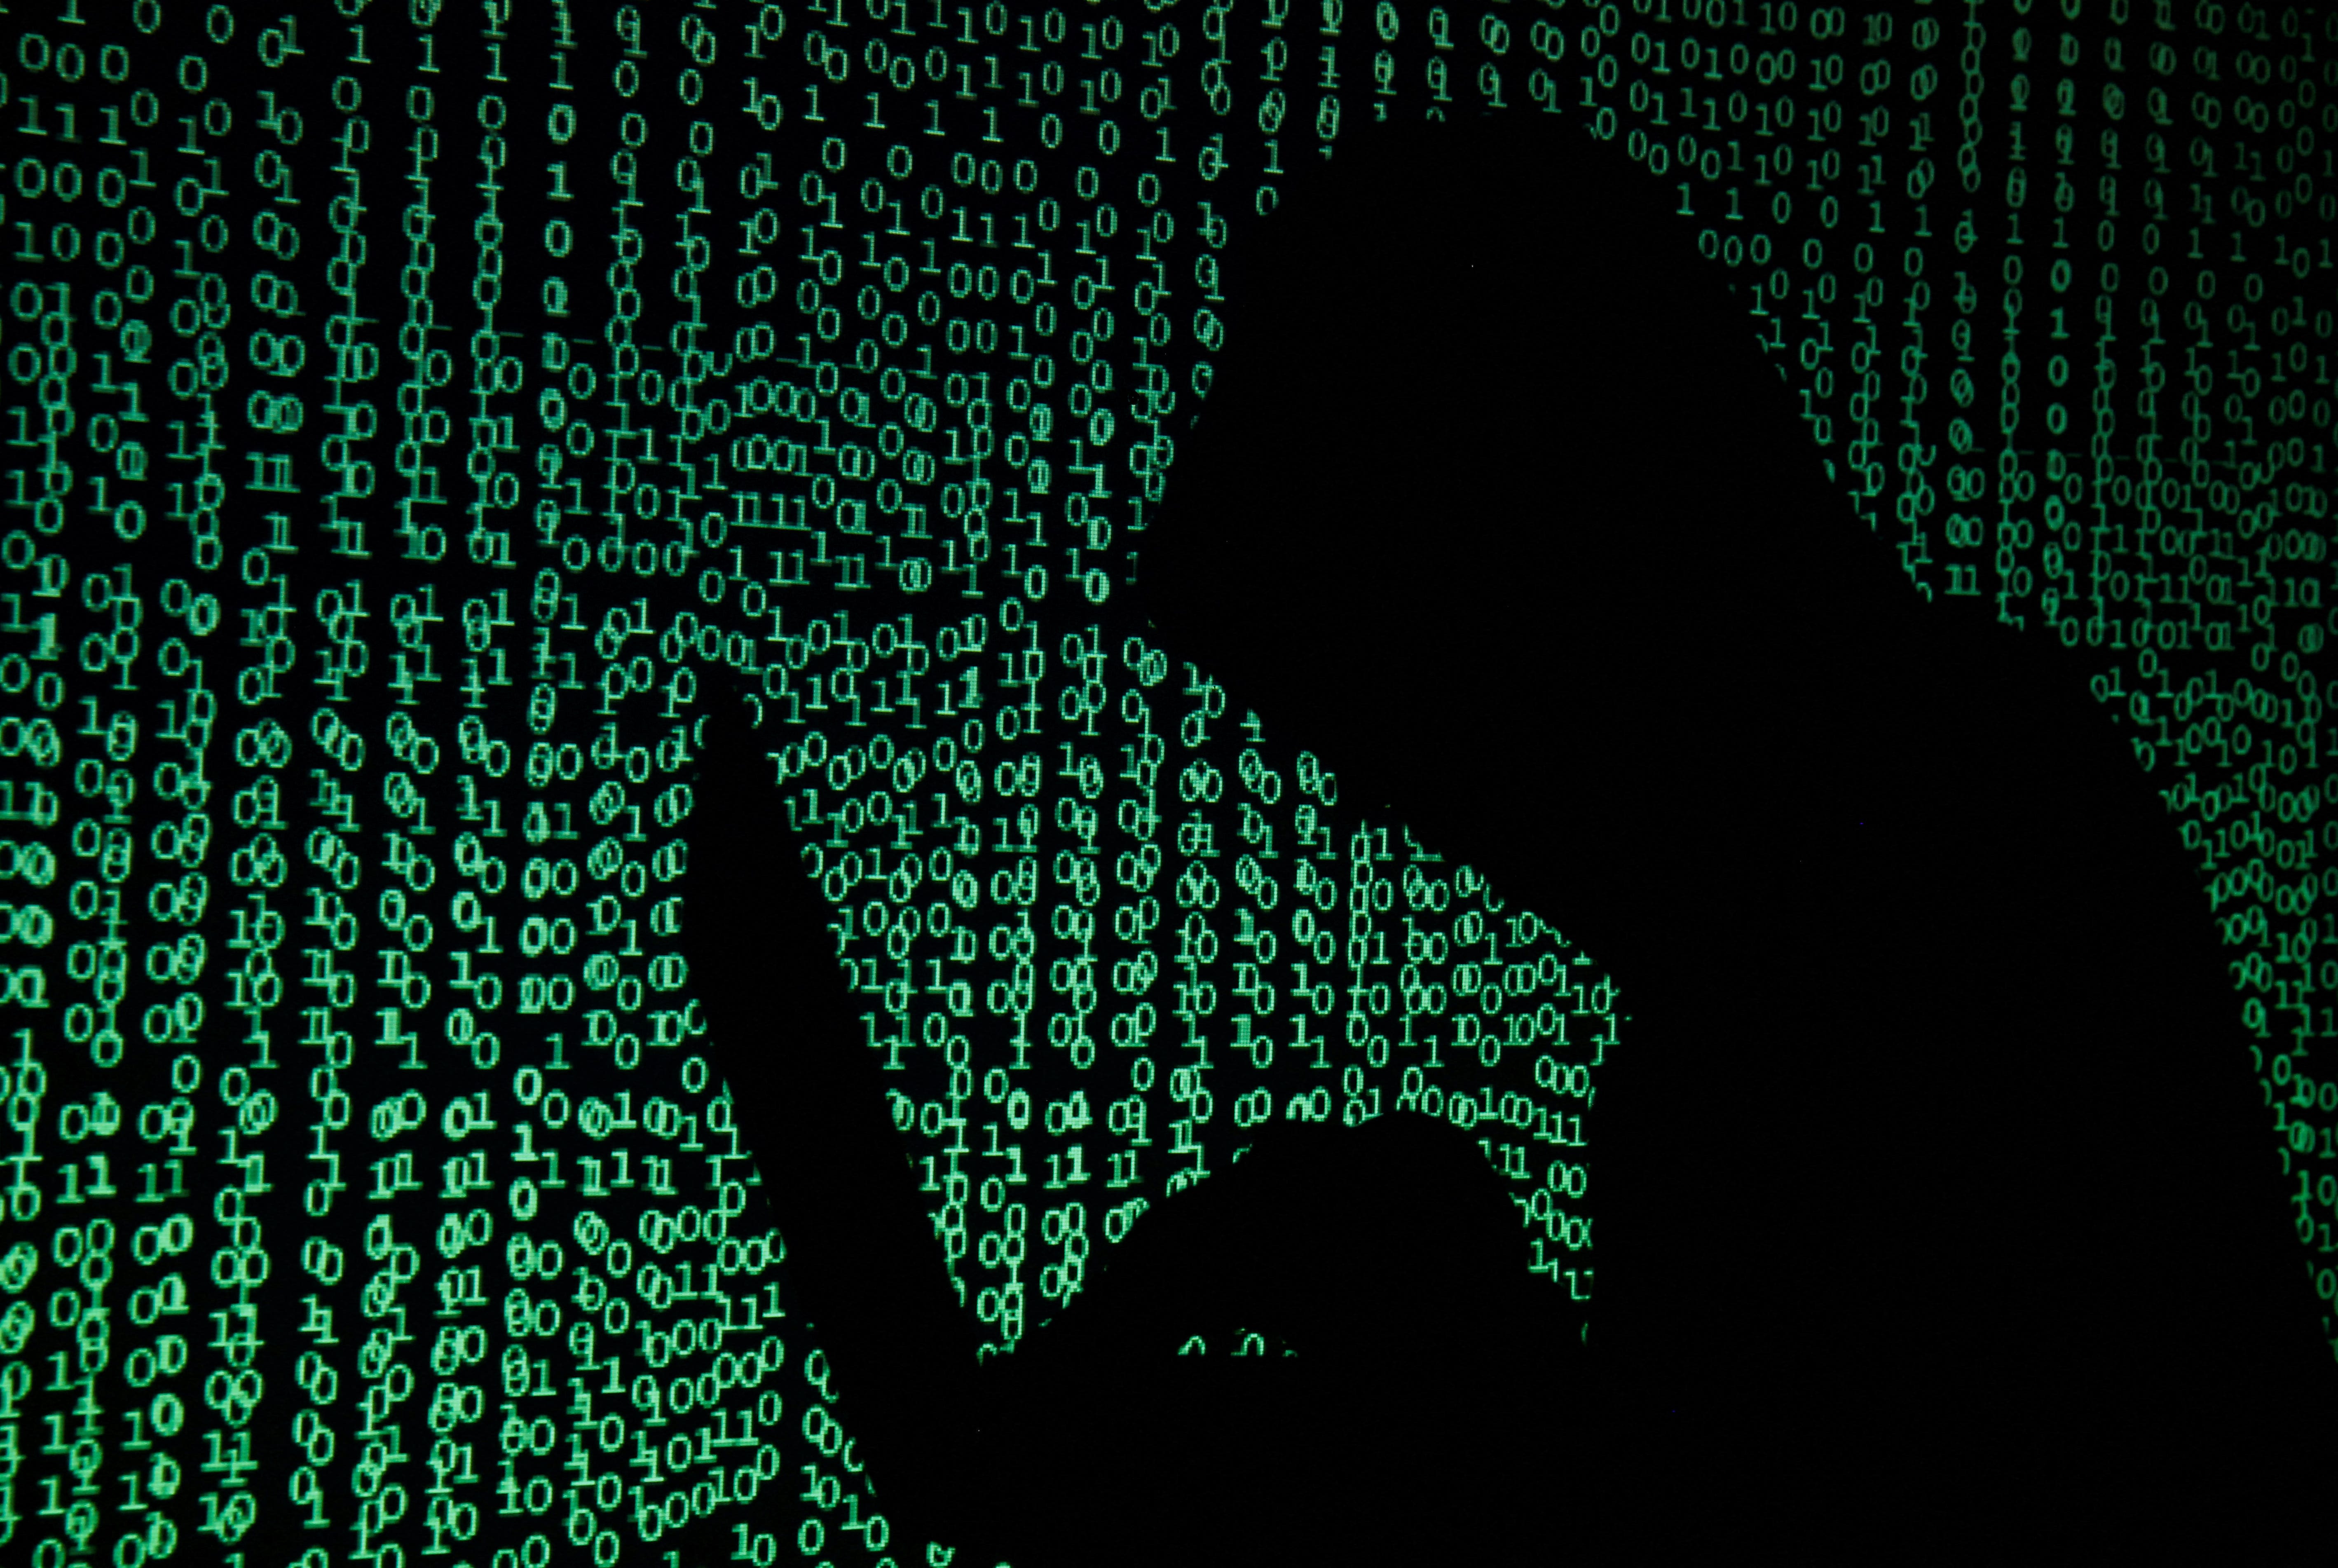 10 billion passwords have been leaked on a hacker site. Are you at risk?